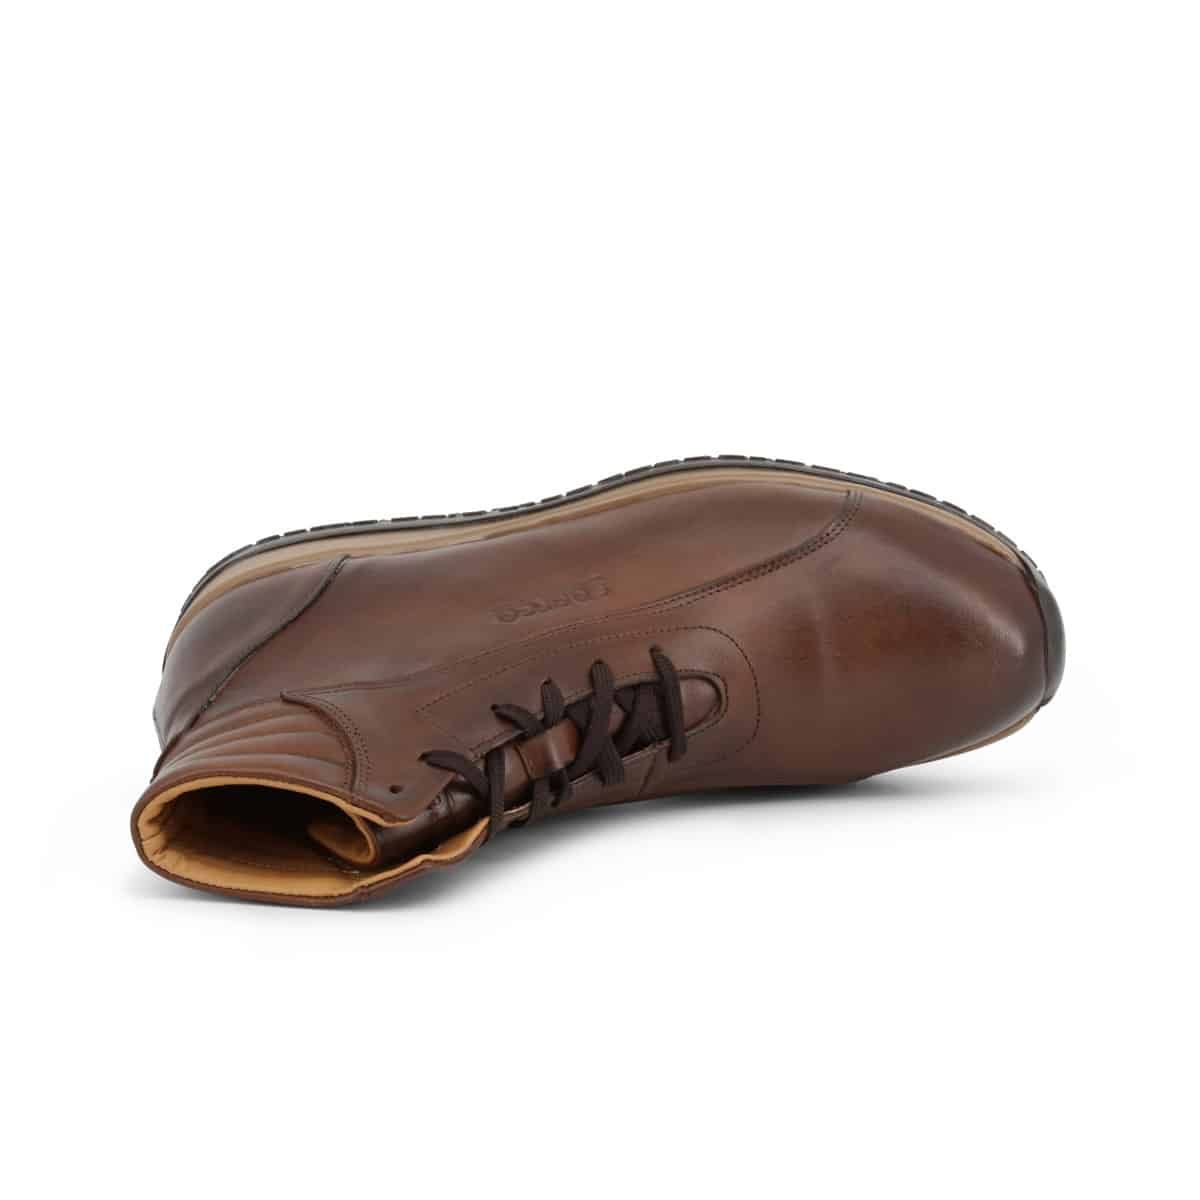 Sparco Monza-GP1 Brown Shoes Sneakers in Leather » Sparco Fashion AU|NZ